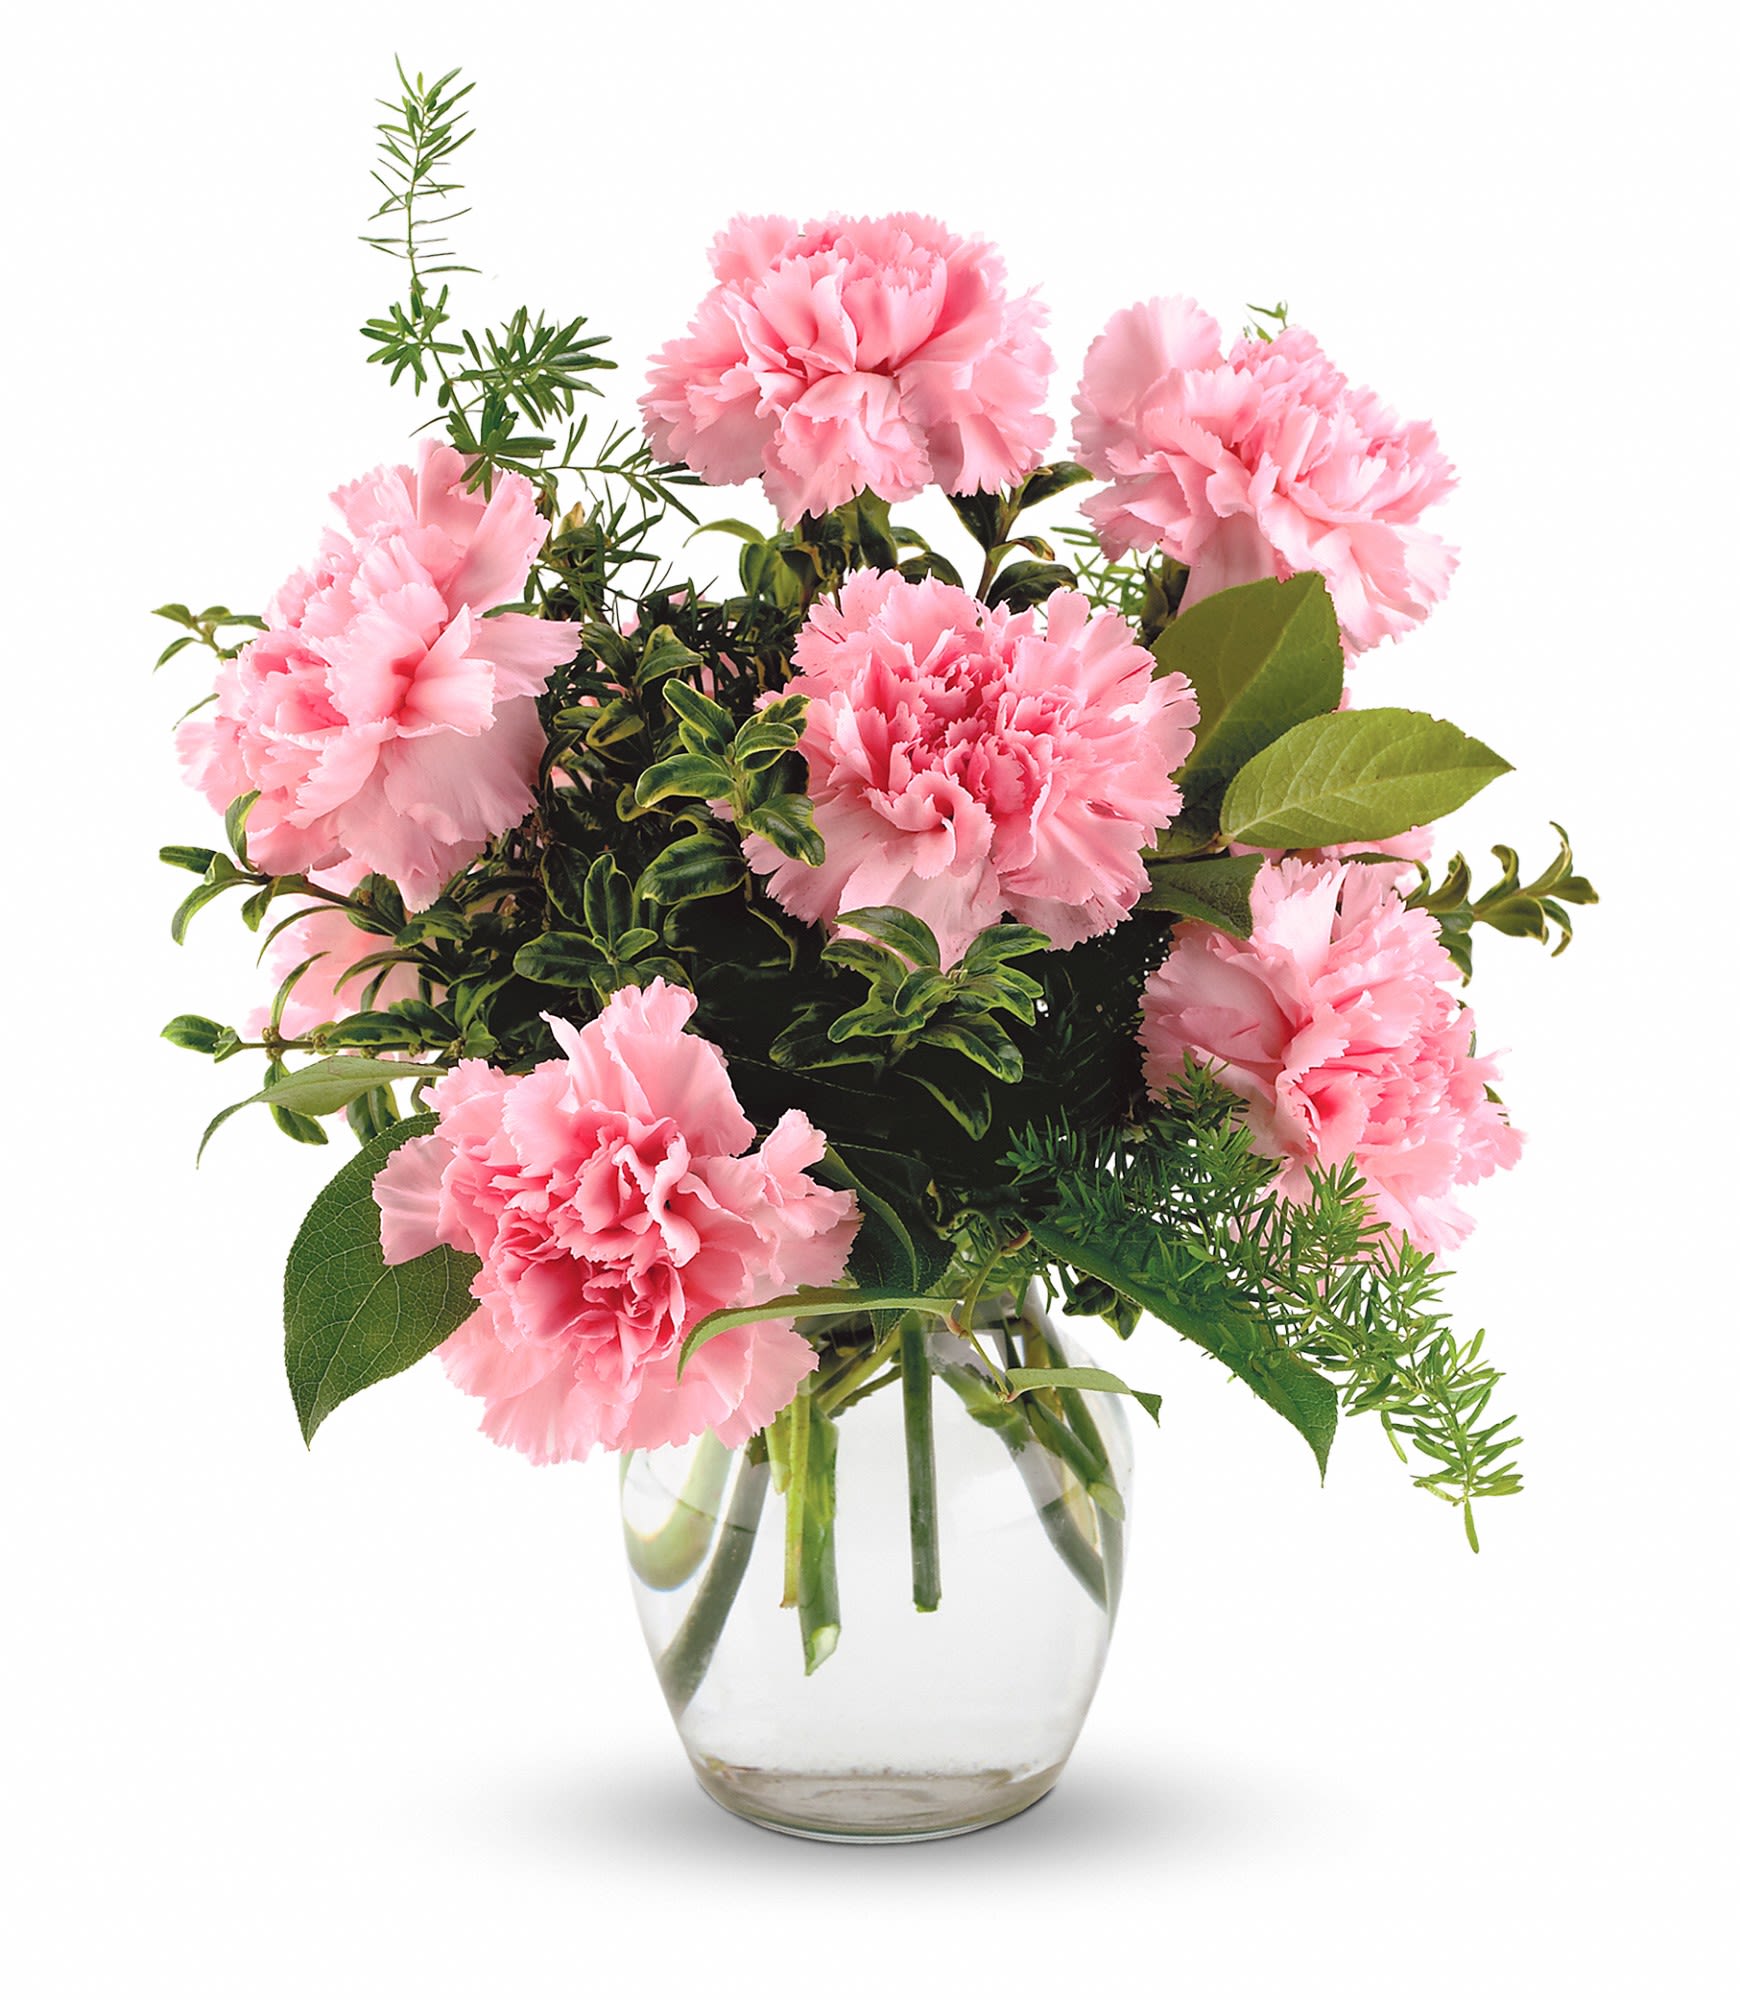 Pink Notion  - Pure, long lasting enjoyment in a simple glass vase of carnations and mixed foliages. The perfect little treasure to show someone you care.  